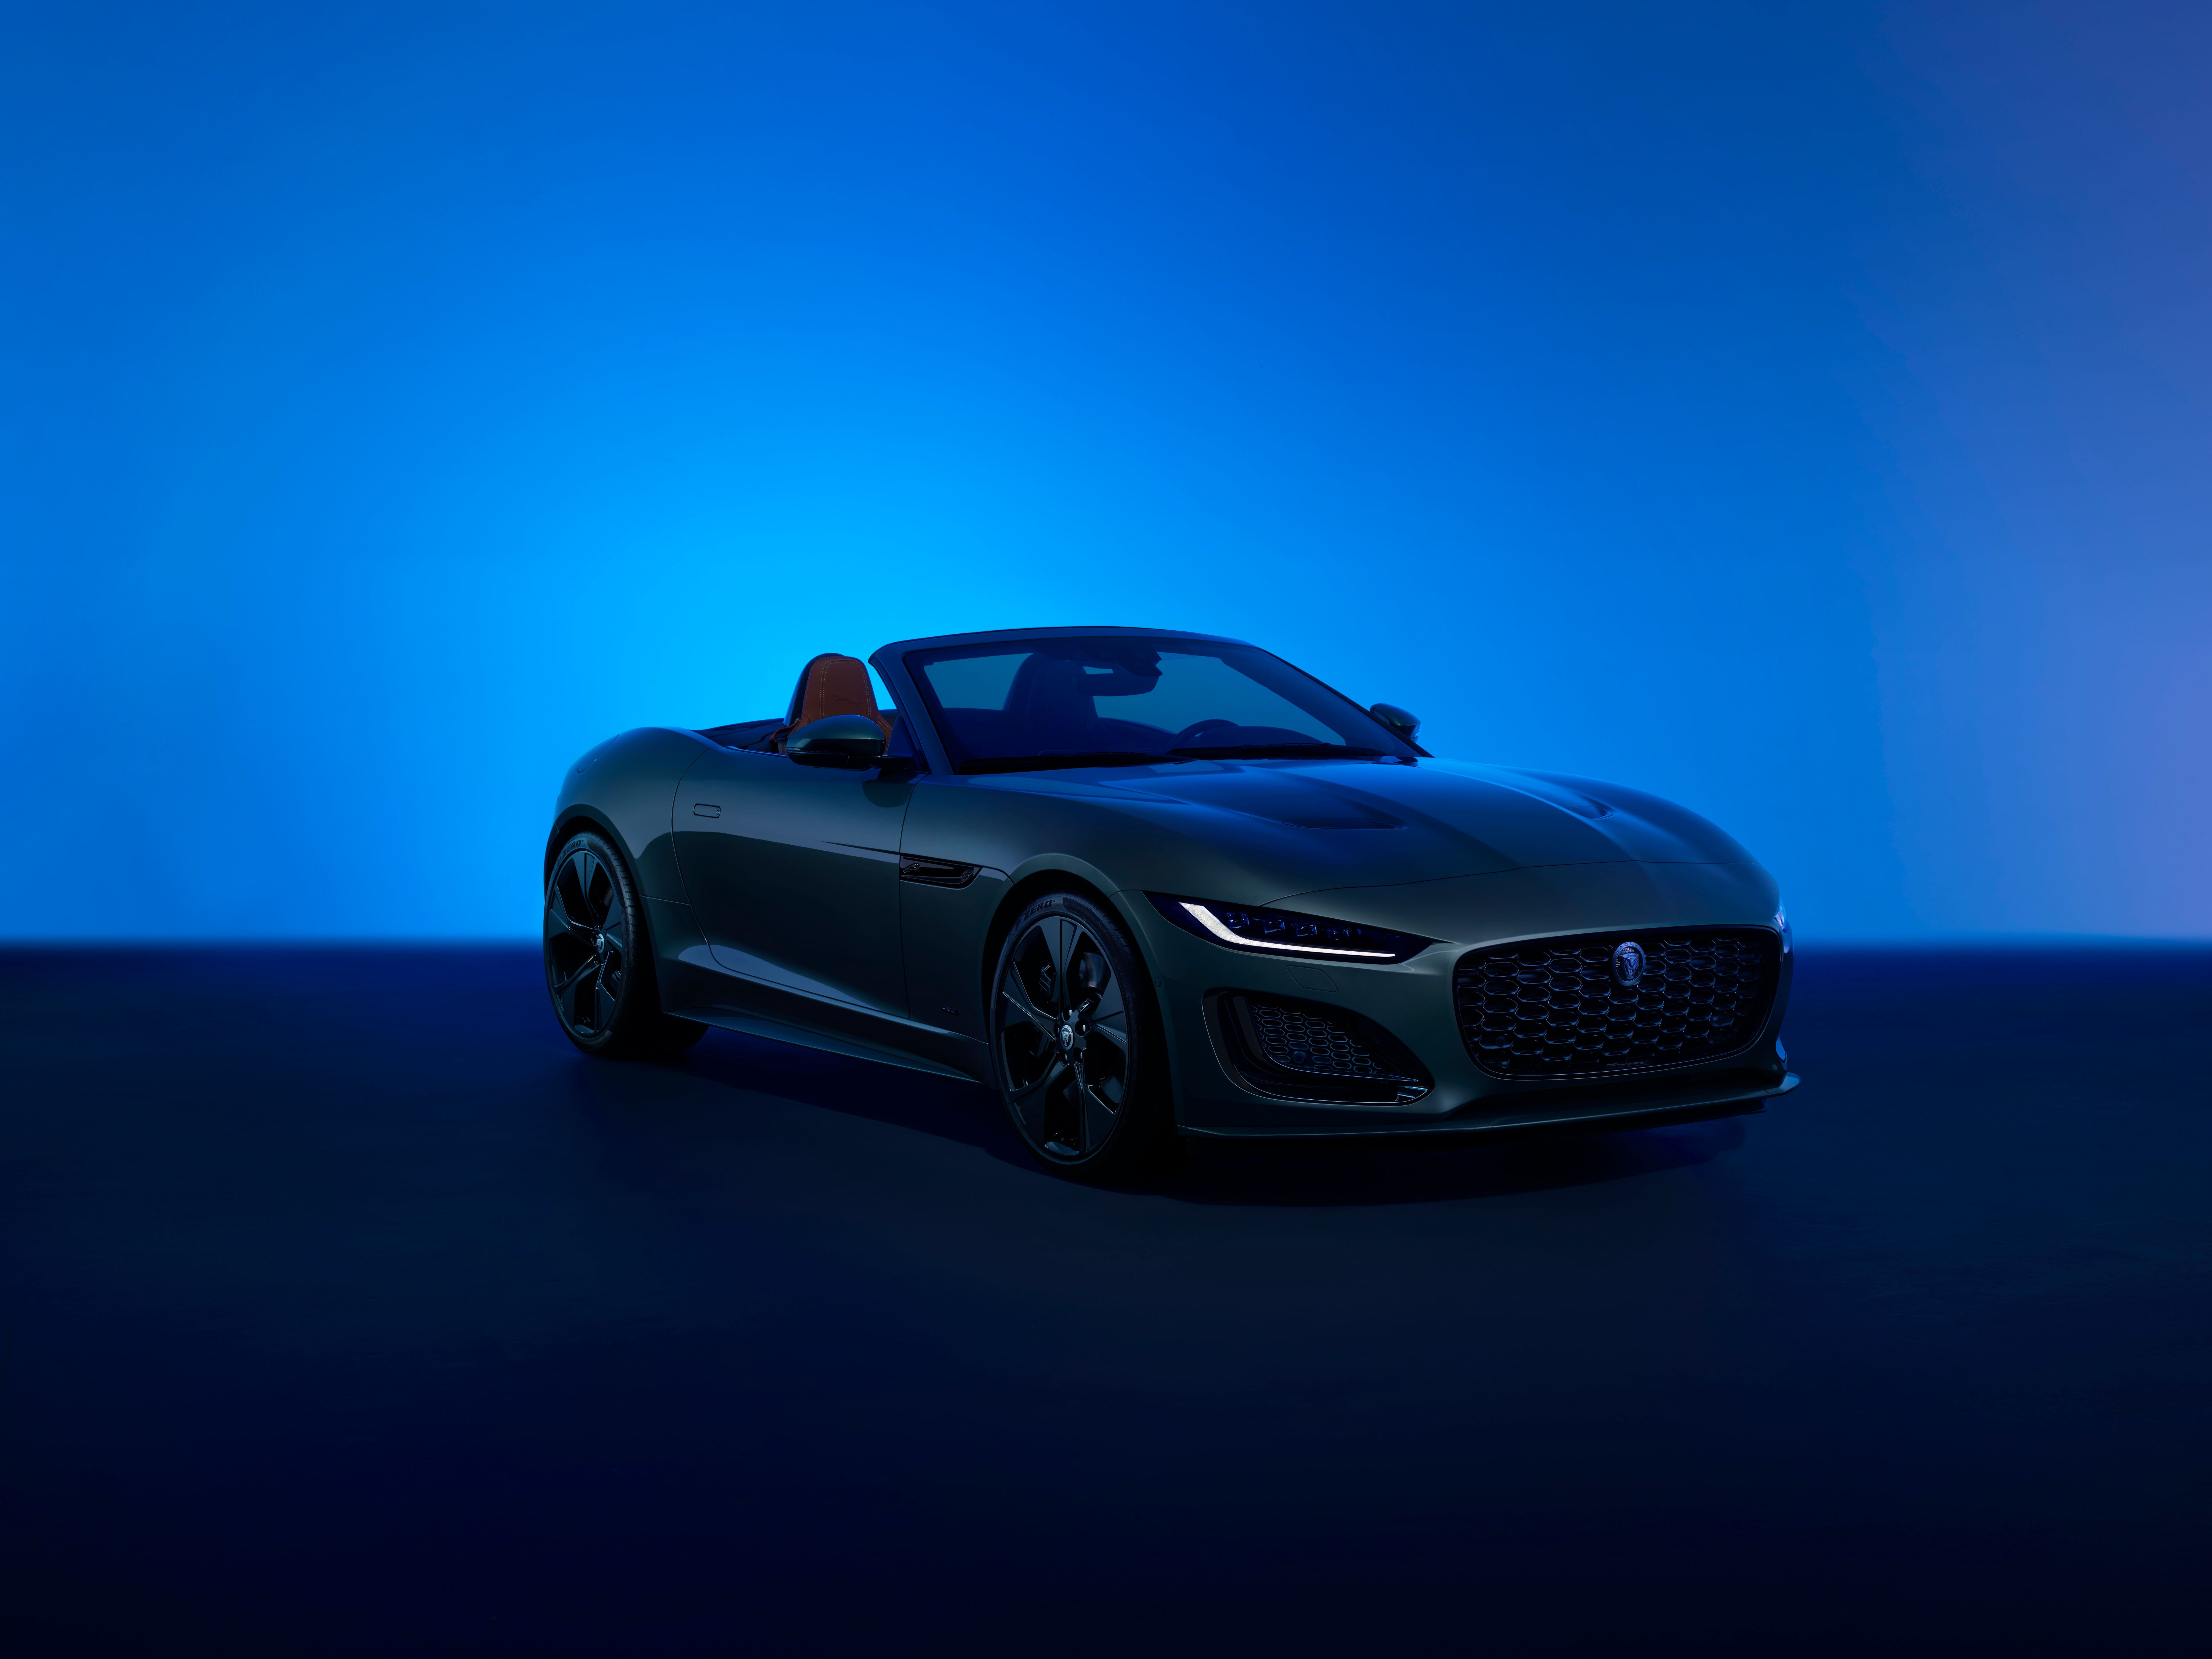 F-Type Marks 75 Years Of Jaguar Sports Cars And Its Final Model Year Update